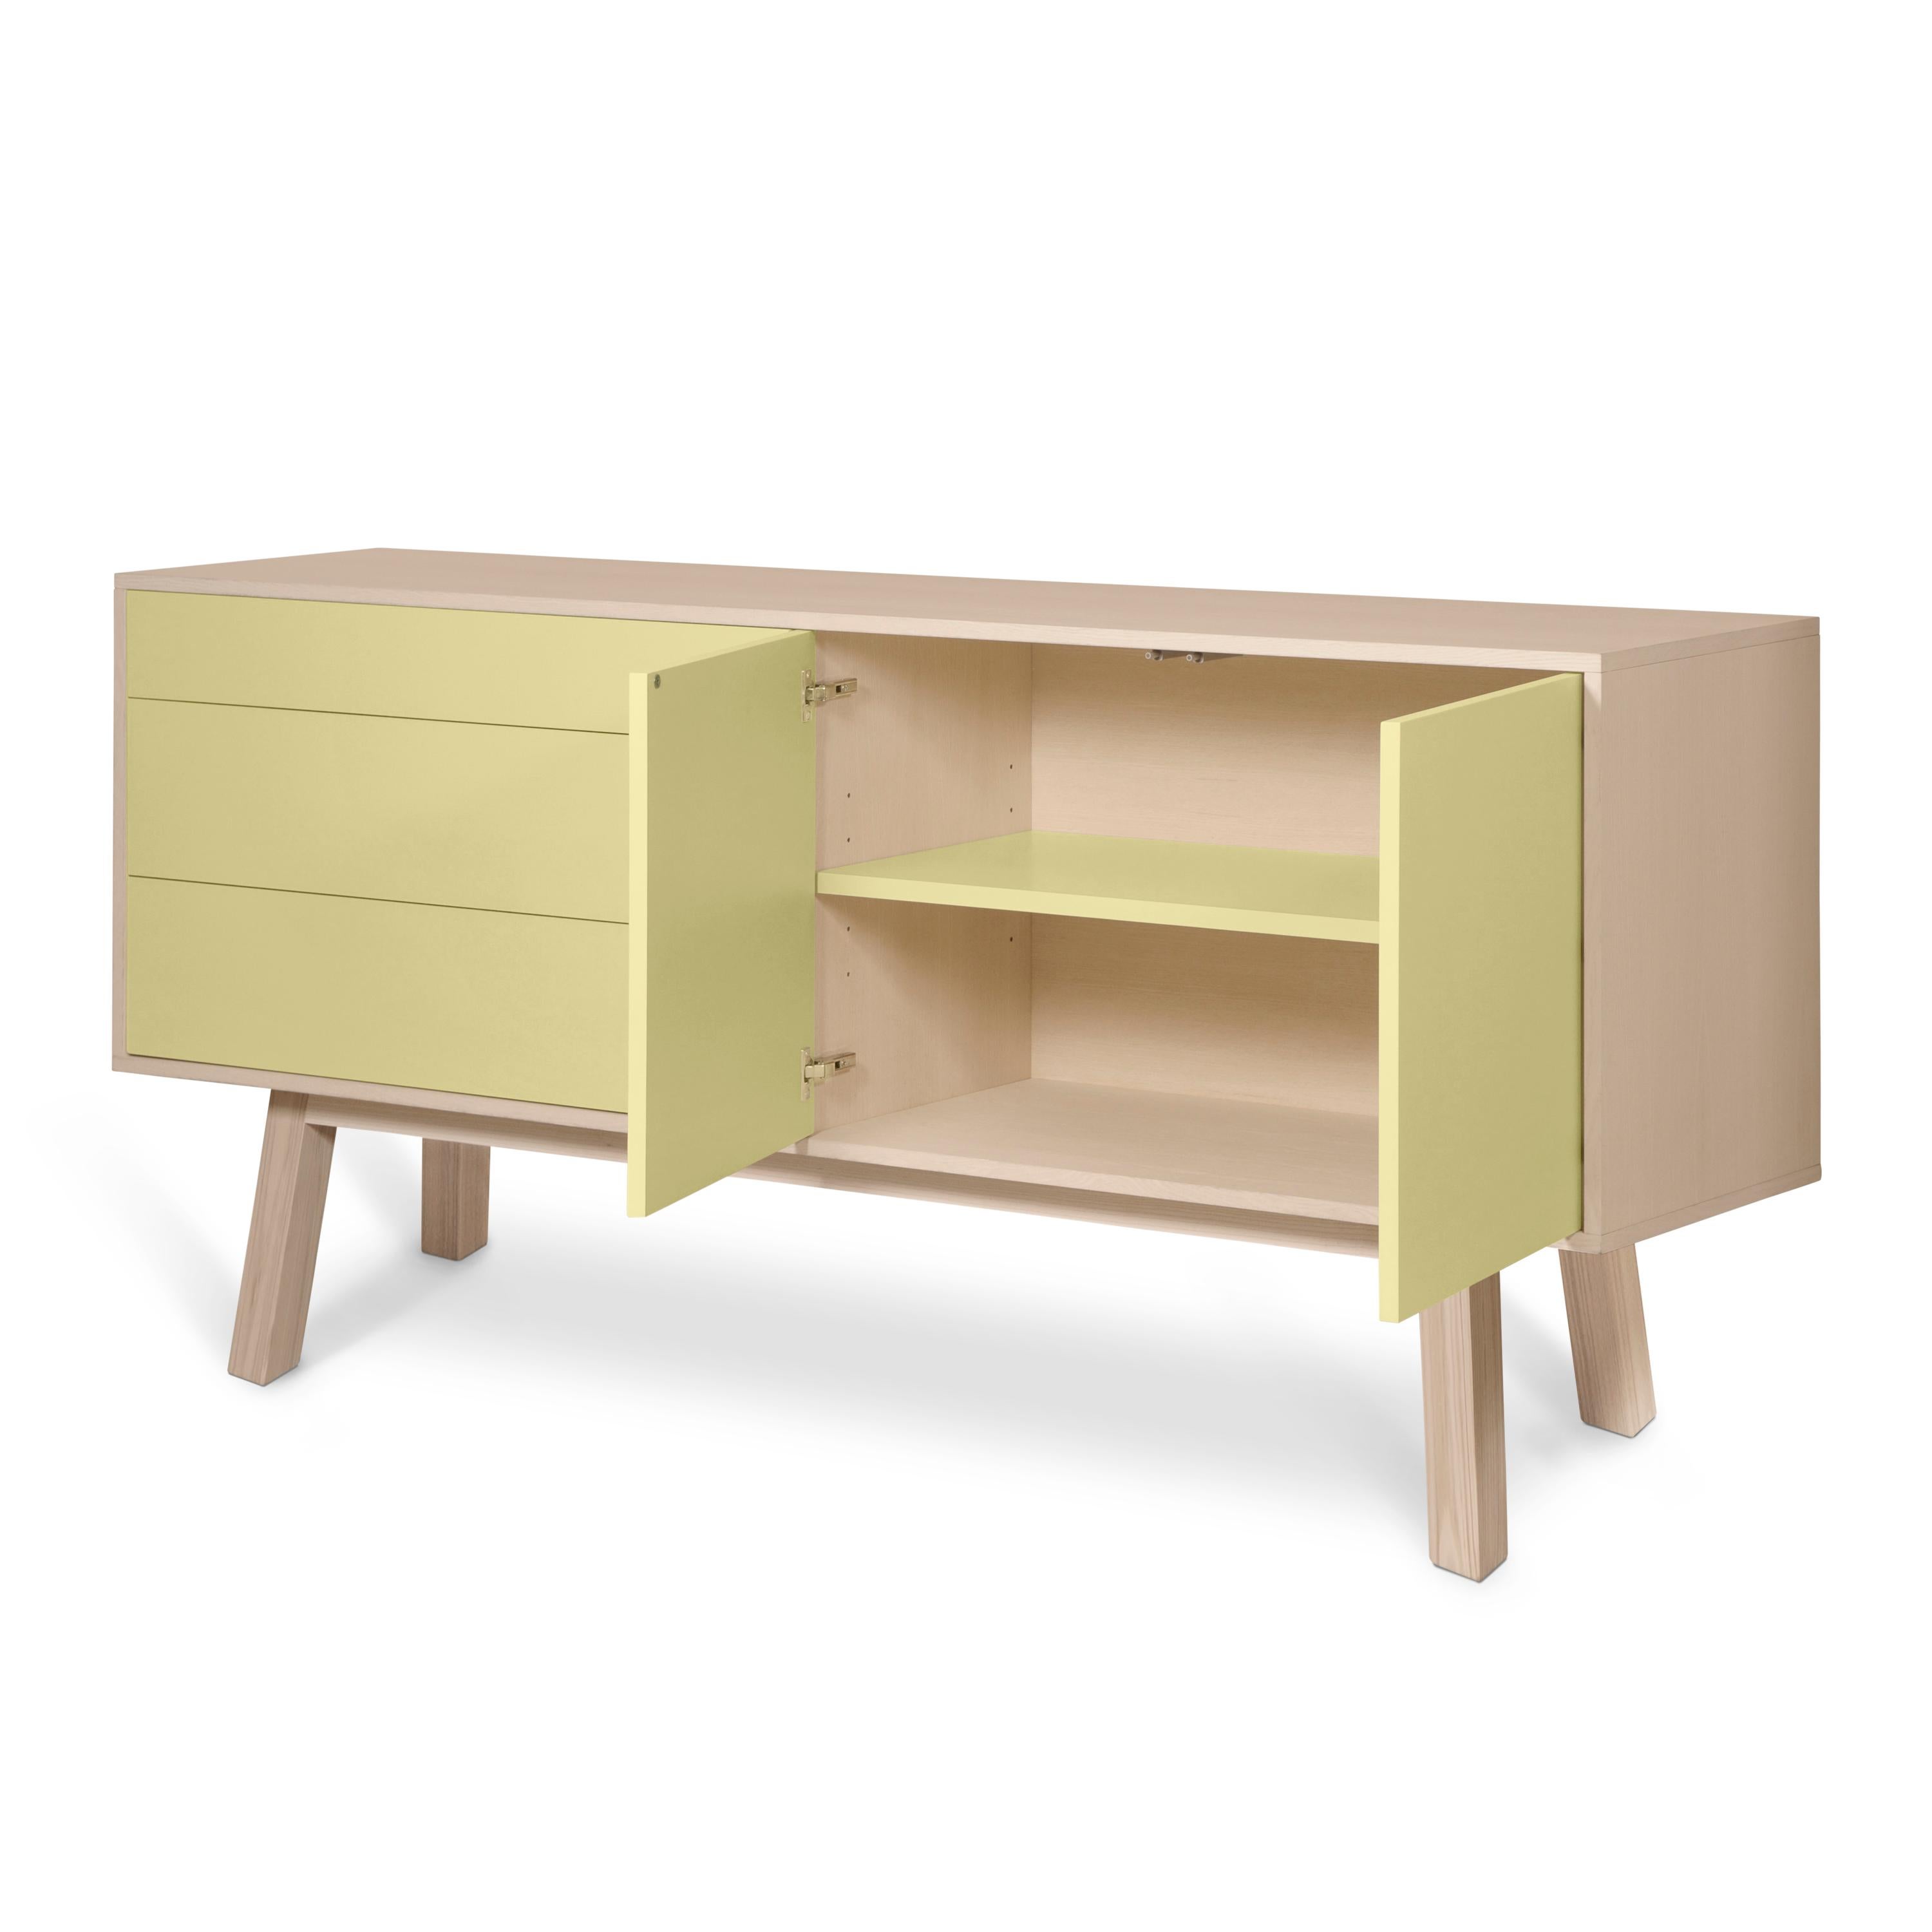 Yellow Higher Sideboard with doors and drawers designed in Paris by E. Gizard For Sale 2